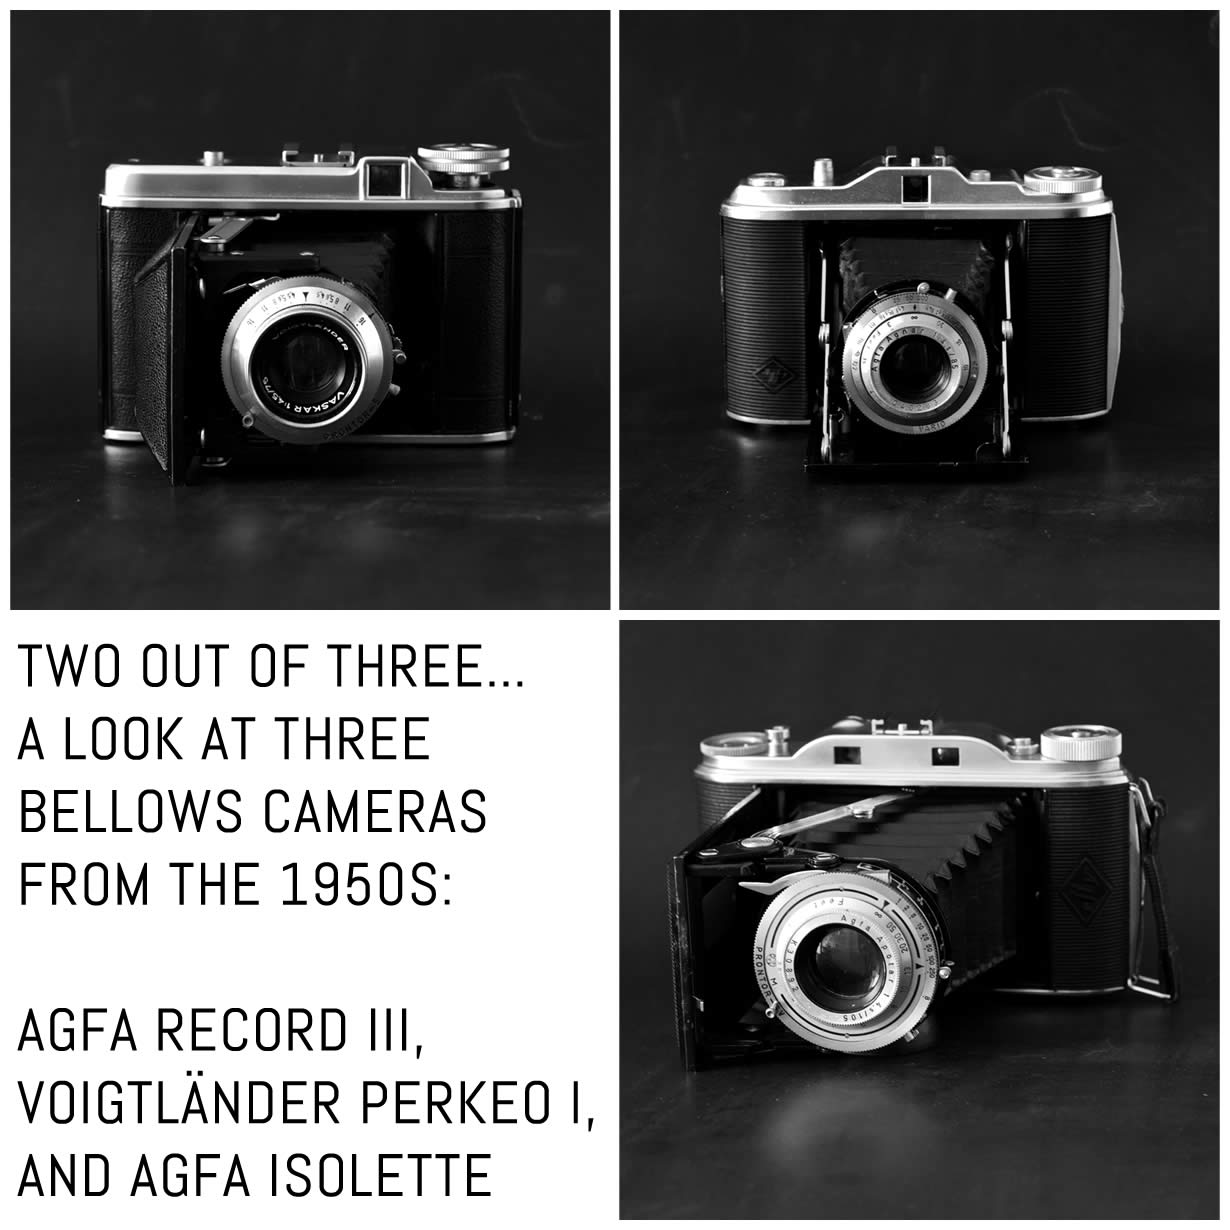 Two out of three. A look at three bellows cameras from the 1950s: Agfa Record III, Voigtländer Perkeo I, and Agfa Isolette